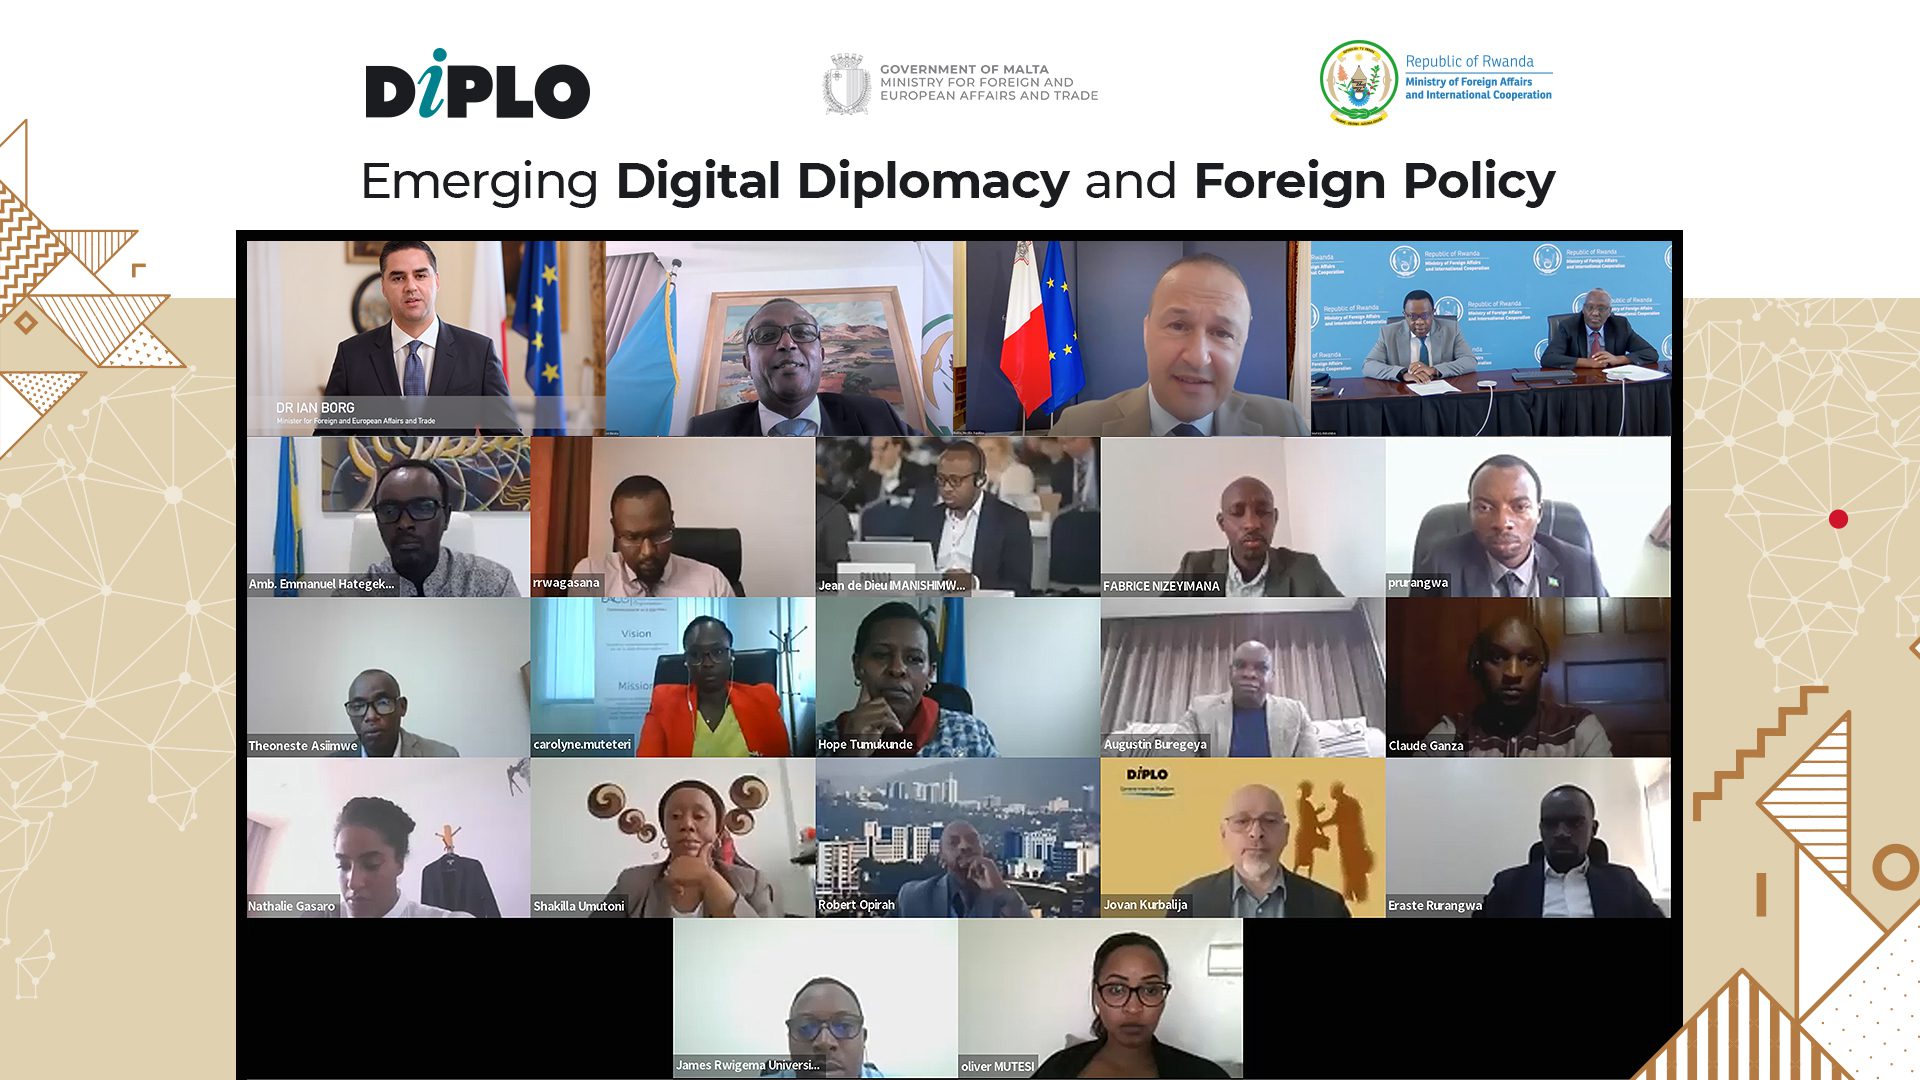 Image of participants and high level speakers during an online session. Image includes logos of the collaborating institutions: Diplo, Malta Ministry for Foreign and European Affairs and Trade, and Rwanda Ministry of Foreign Affairs and International Cooperation.